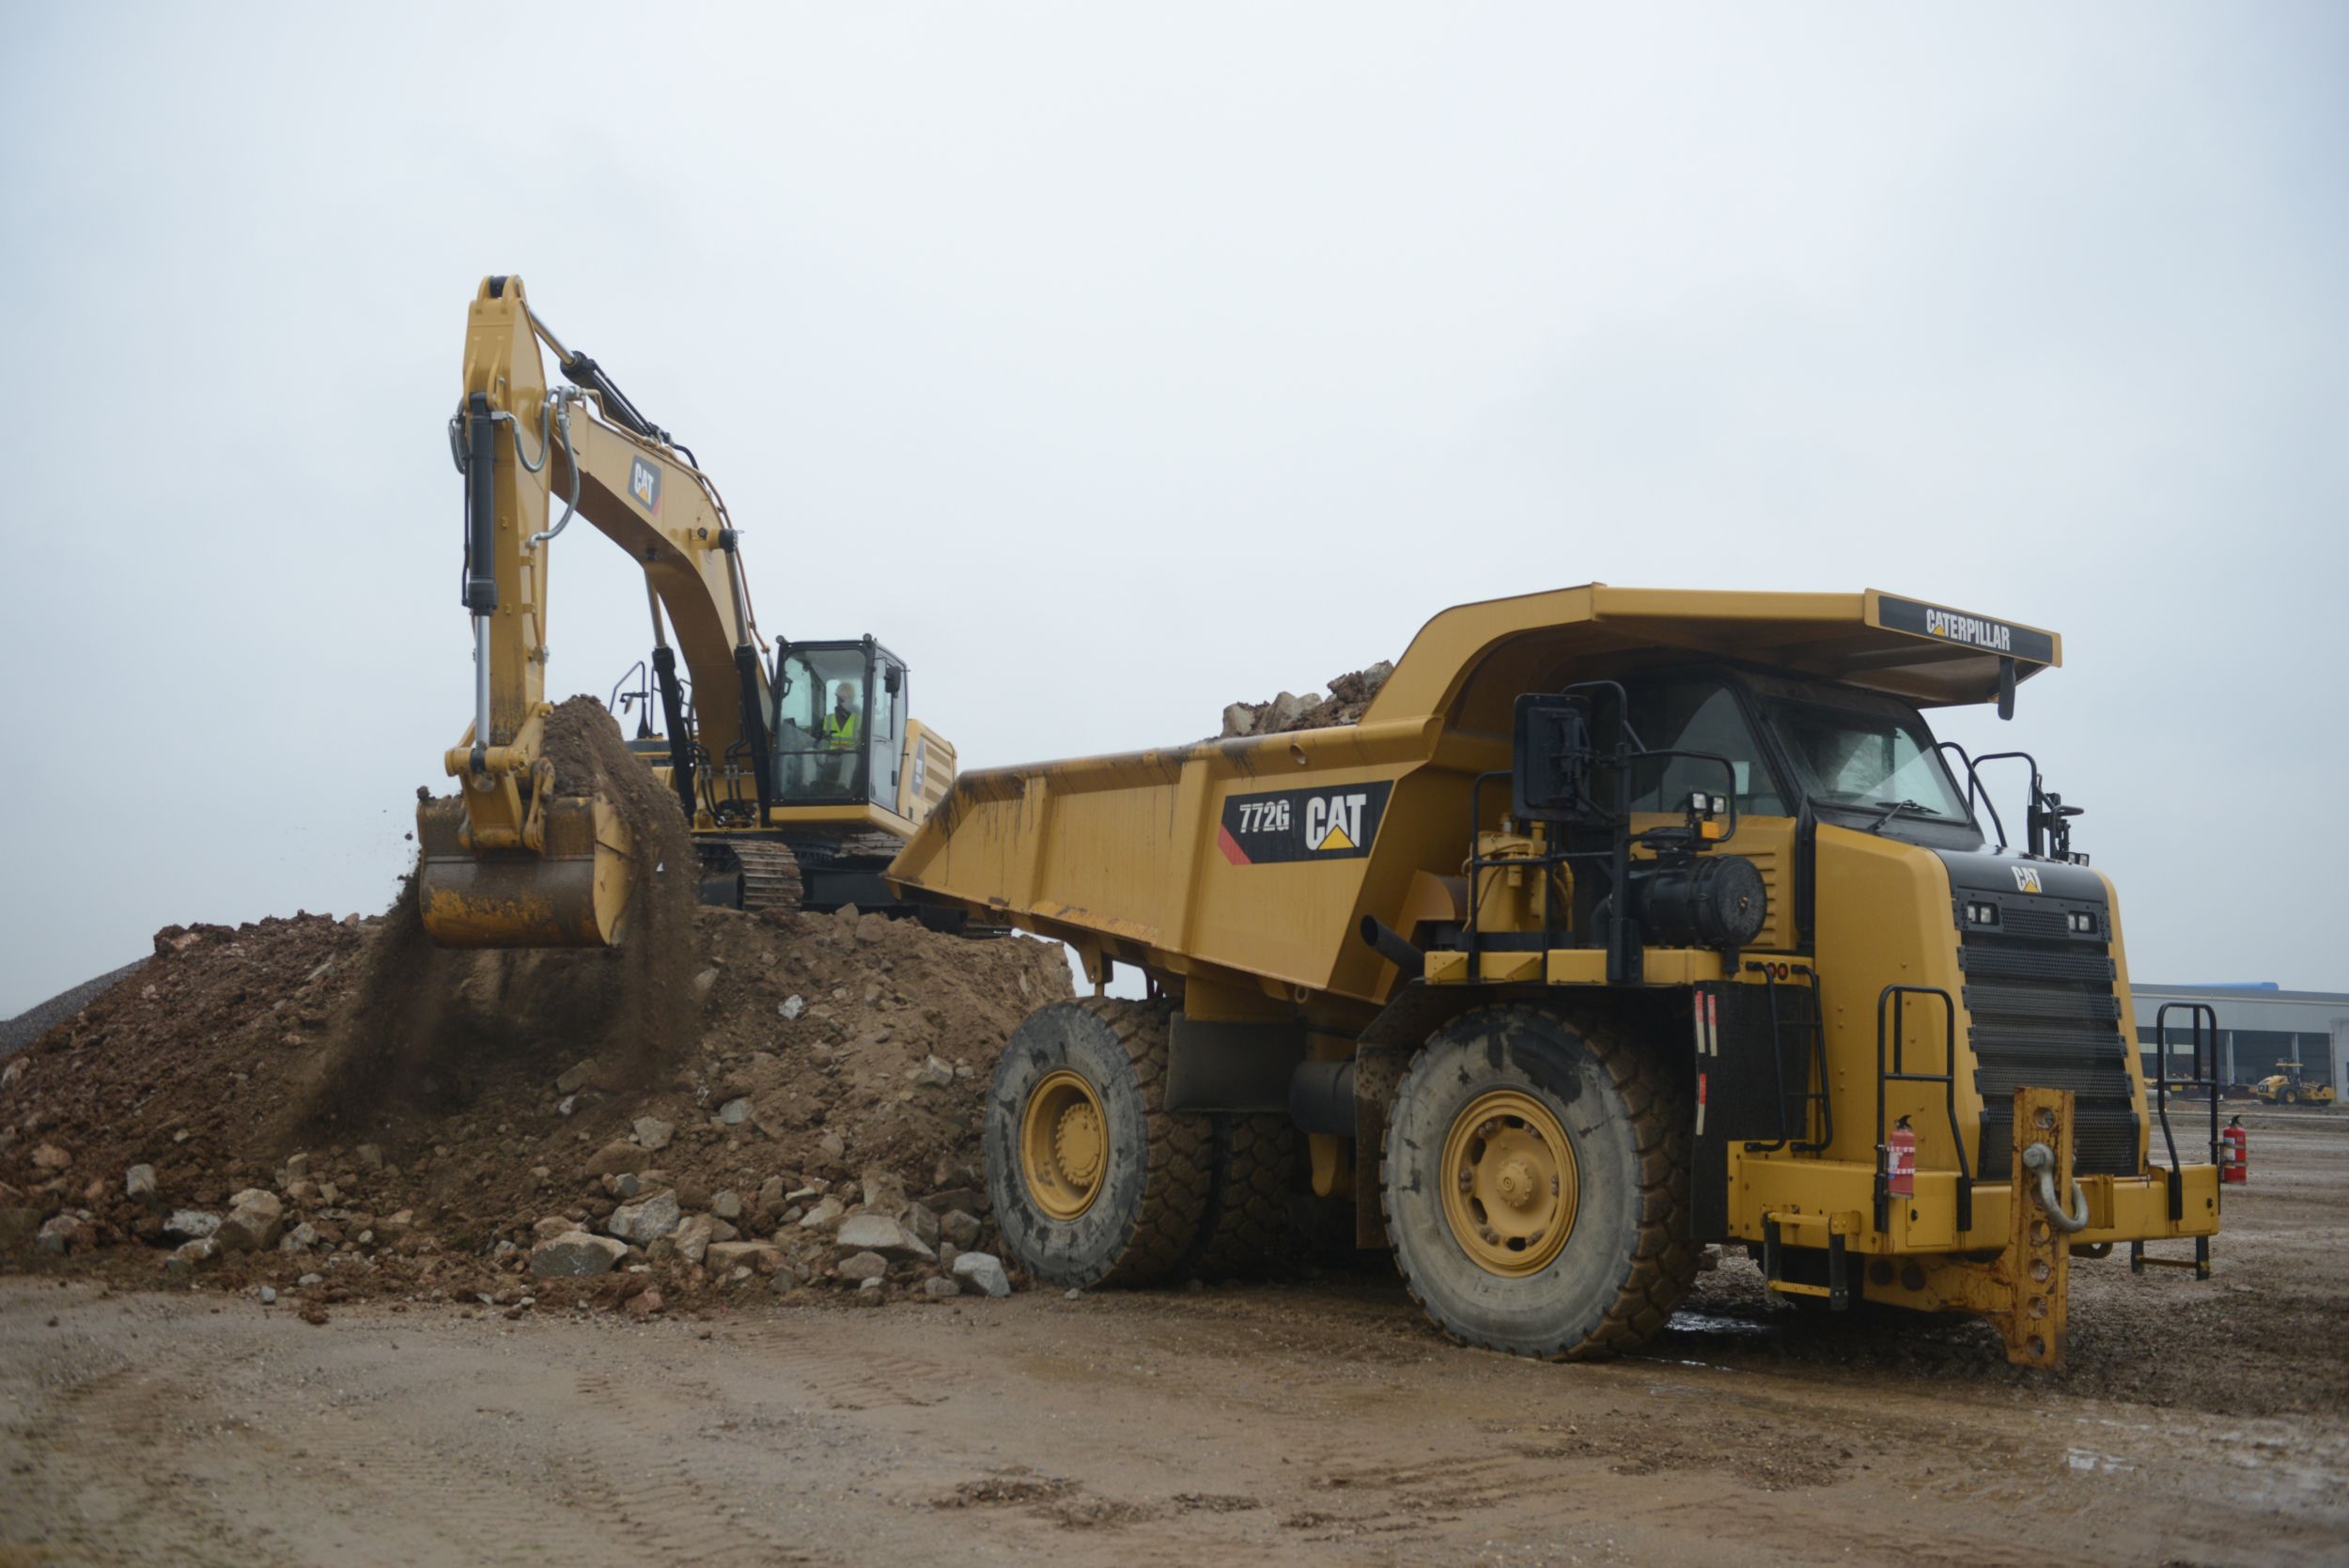 The 336 GC is built to take on heavy rock and other hard jobs.